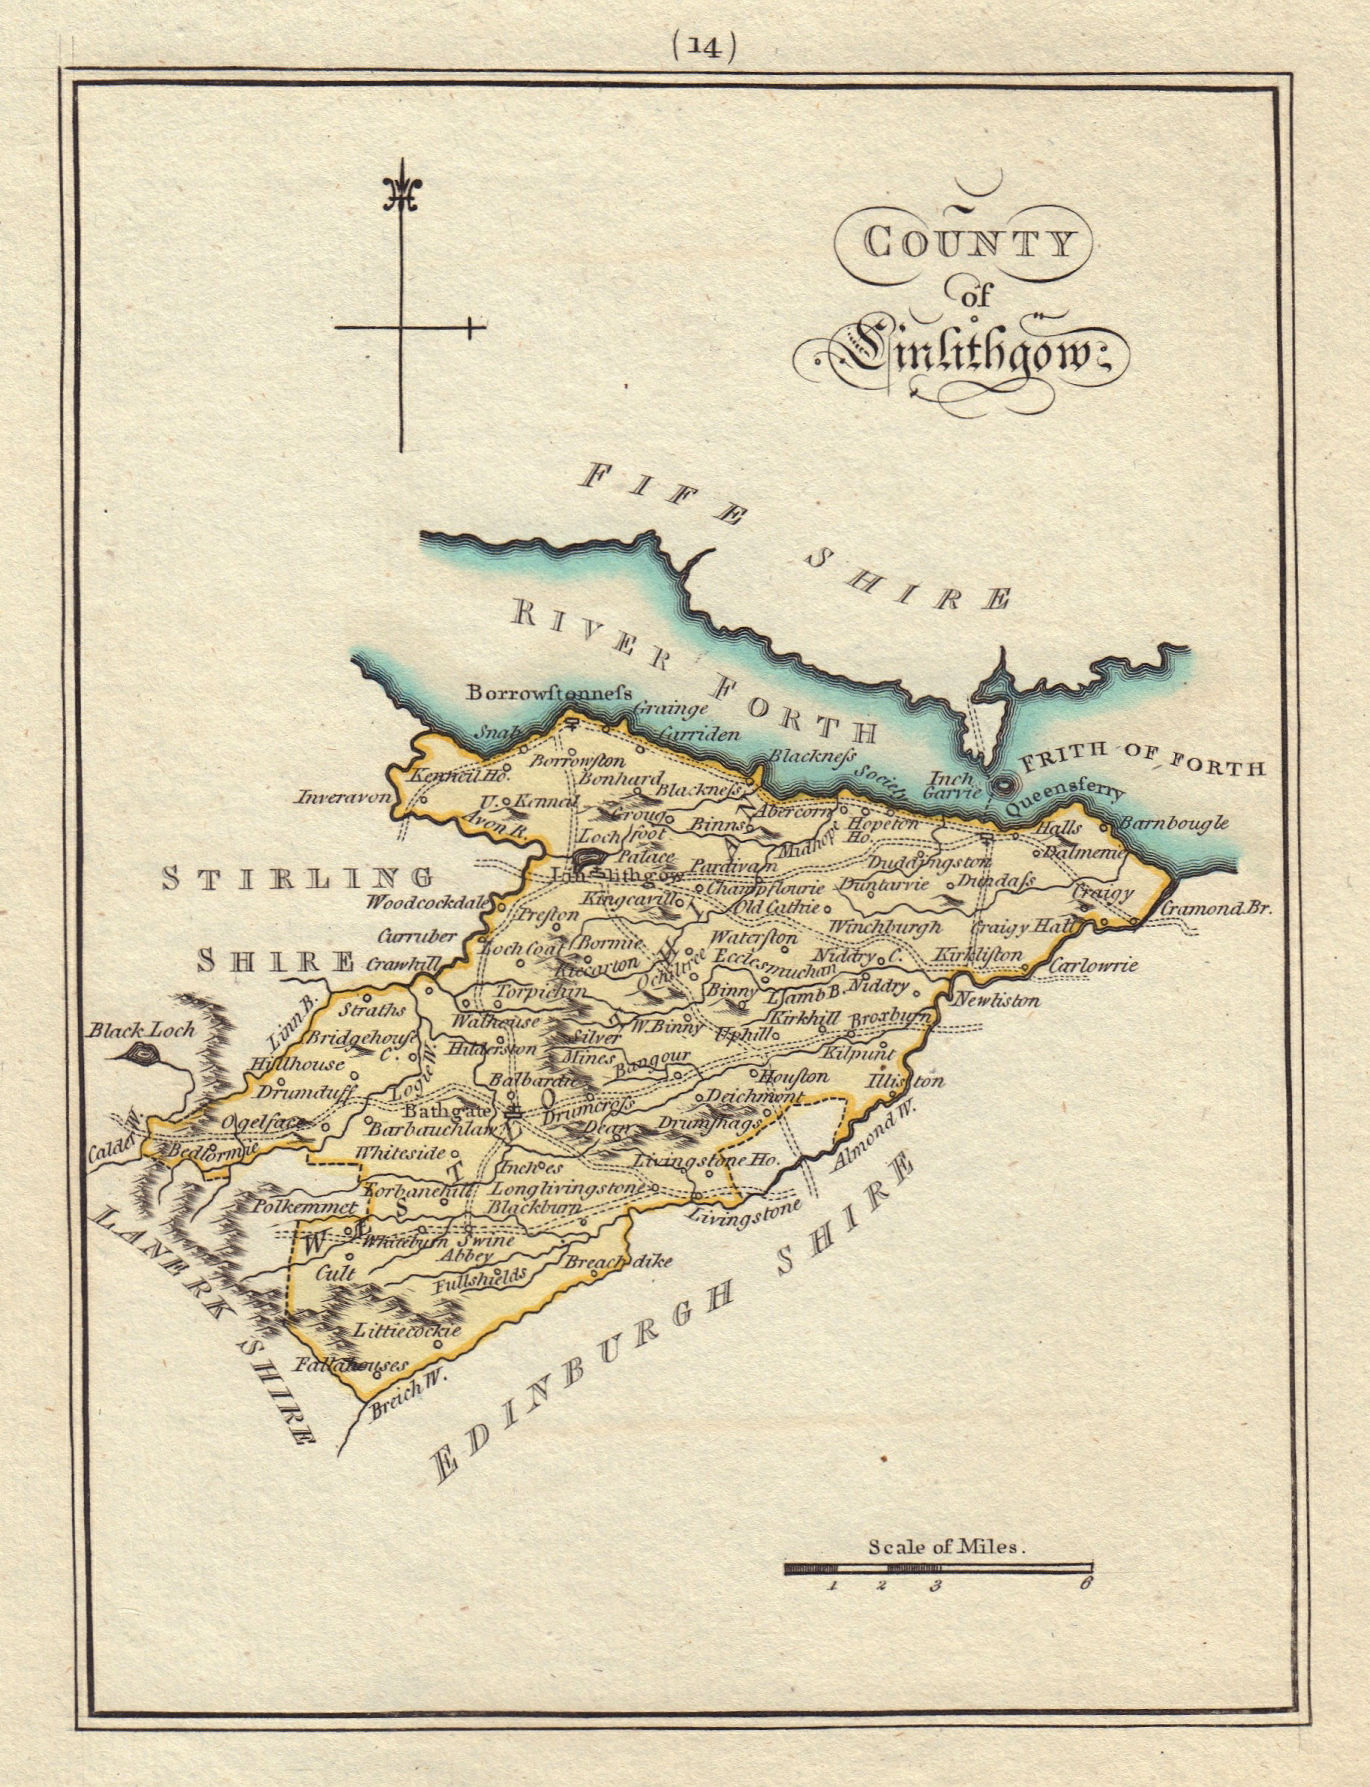 Associate Product County of Linlithgow. Linlithgowshire / West Lothian. SAYER / ARMSTRONG 1794 map